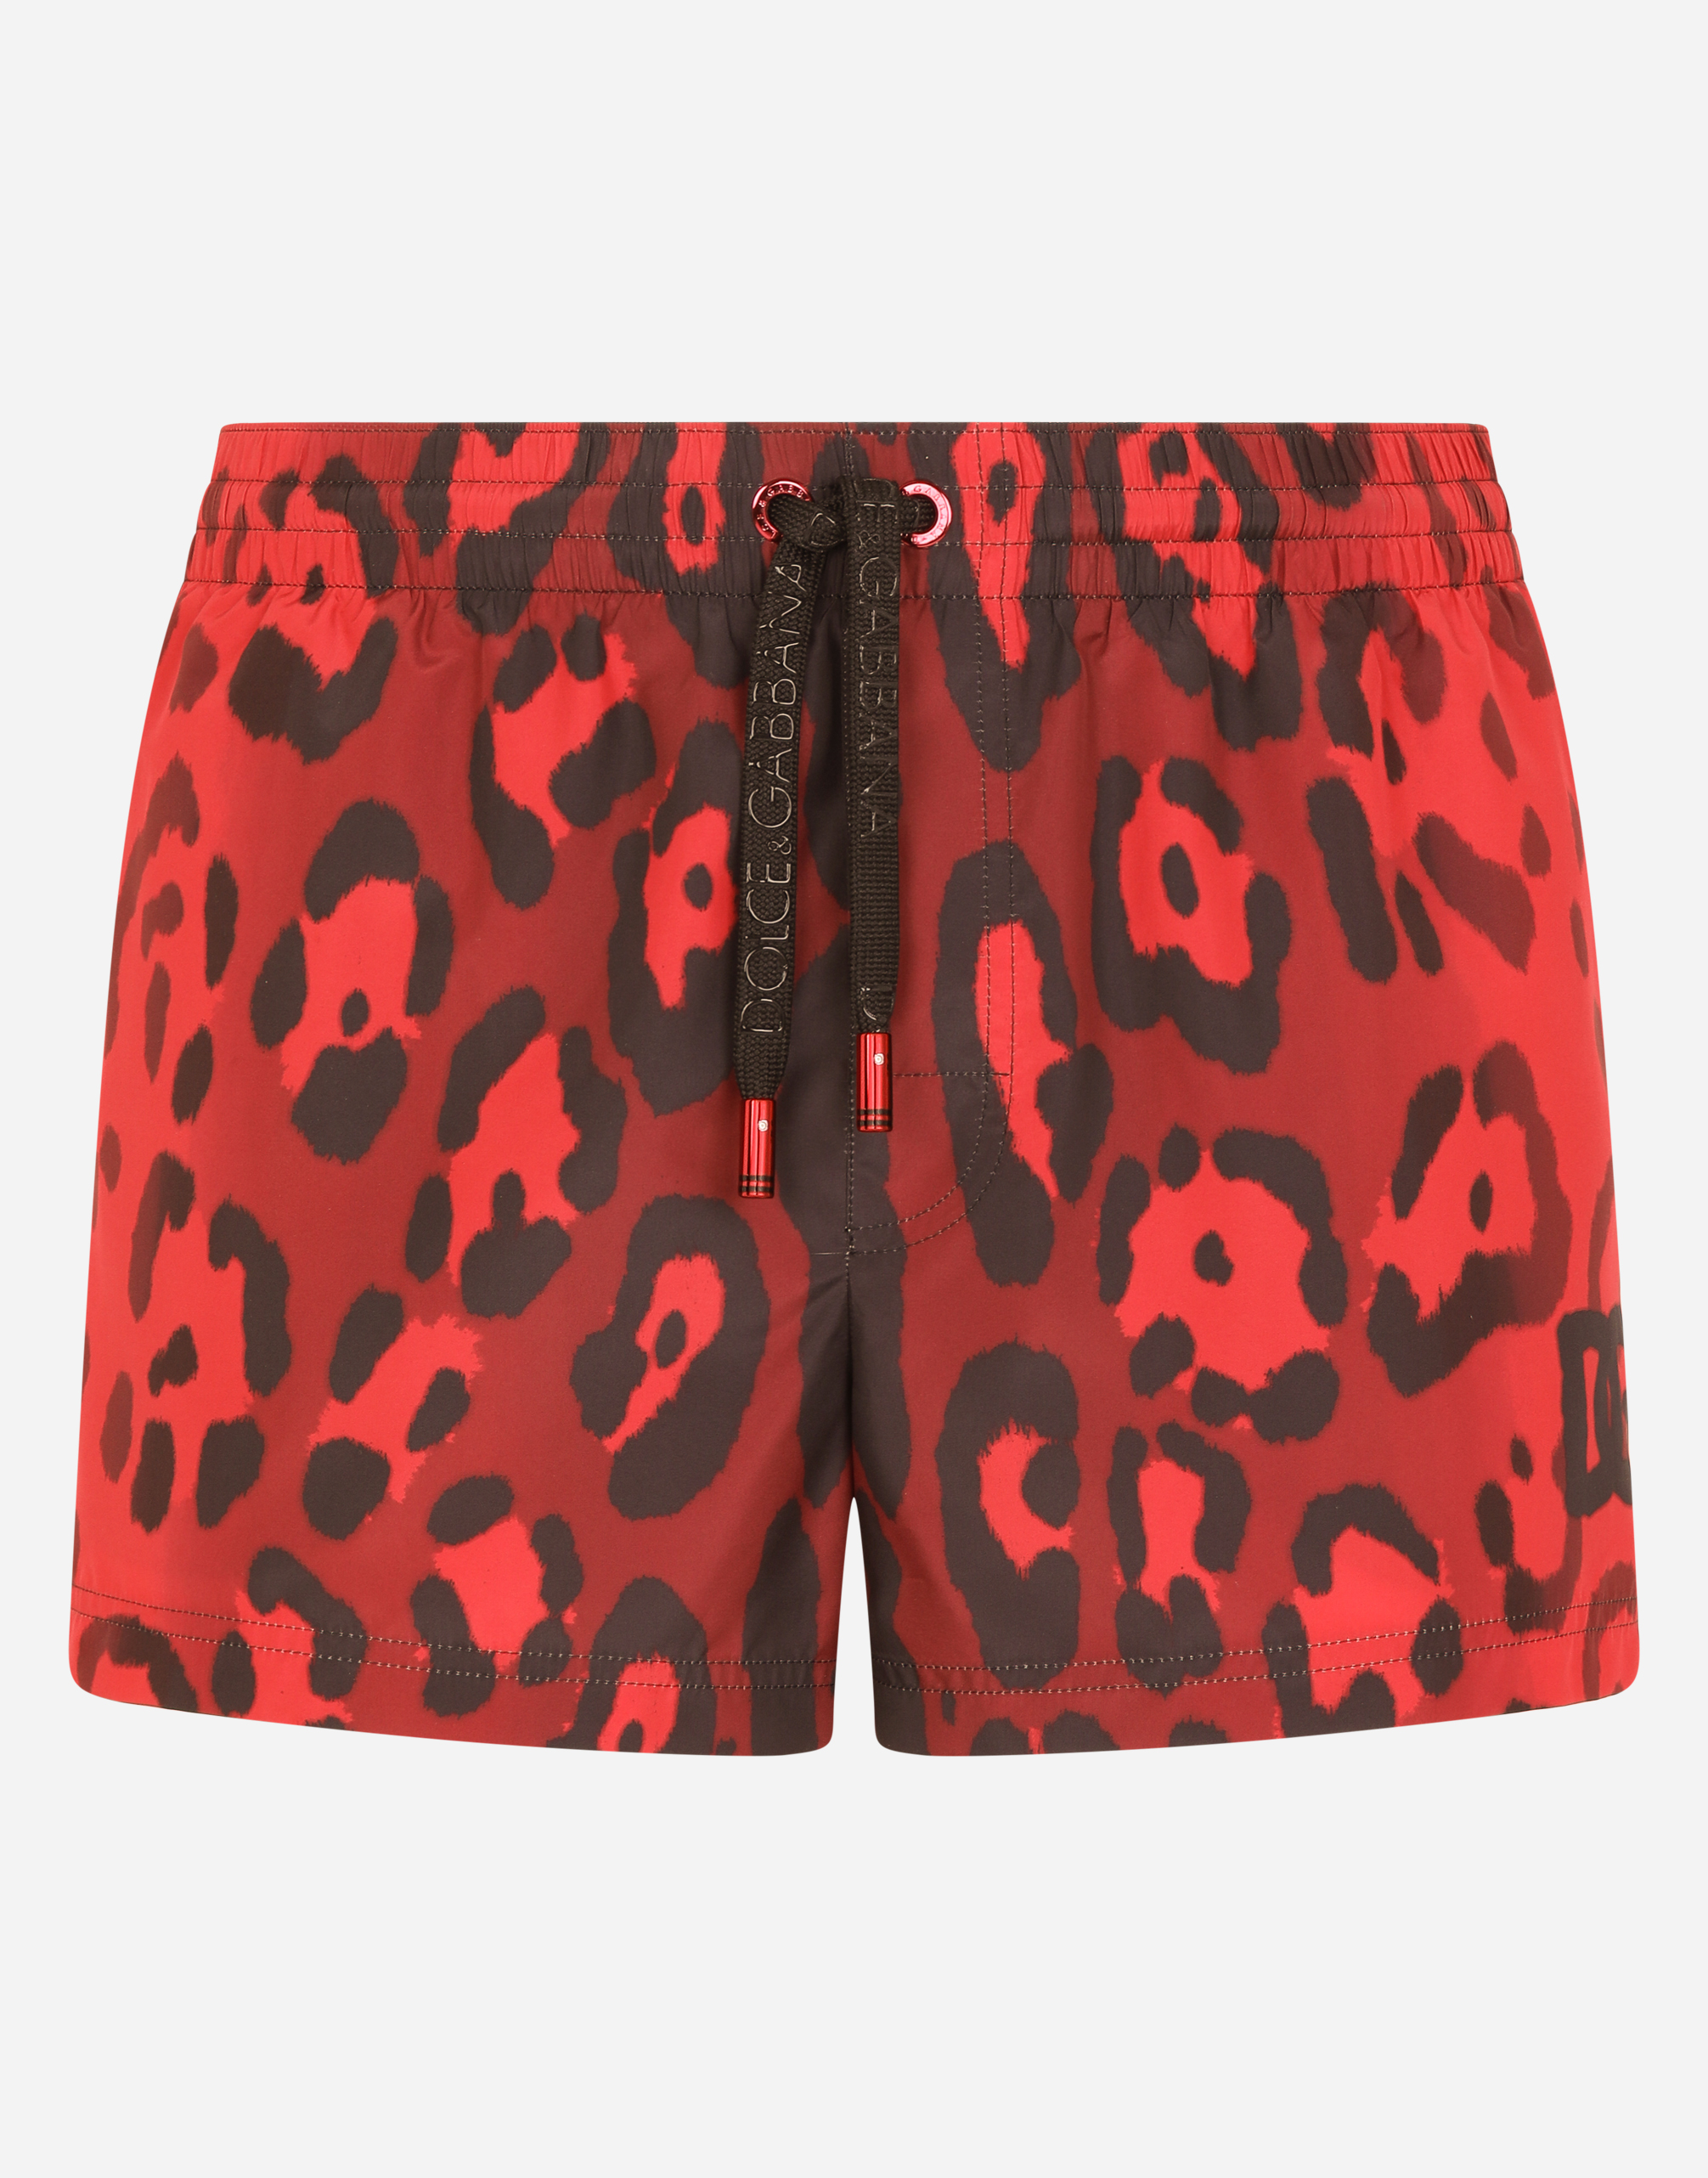 Short swim trunks with leopard print in Multicolor